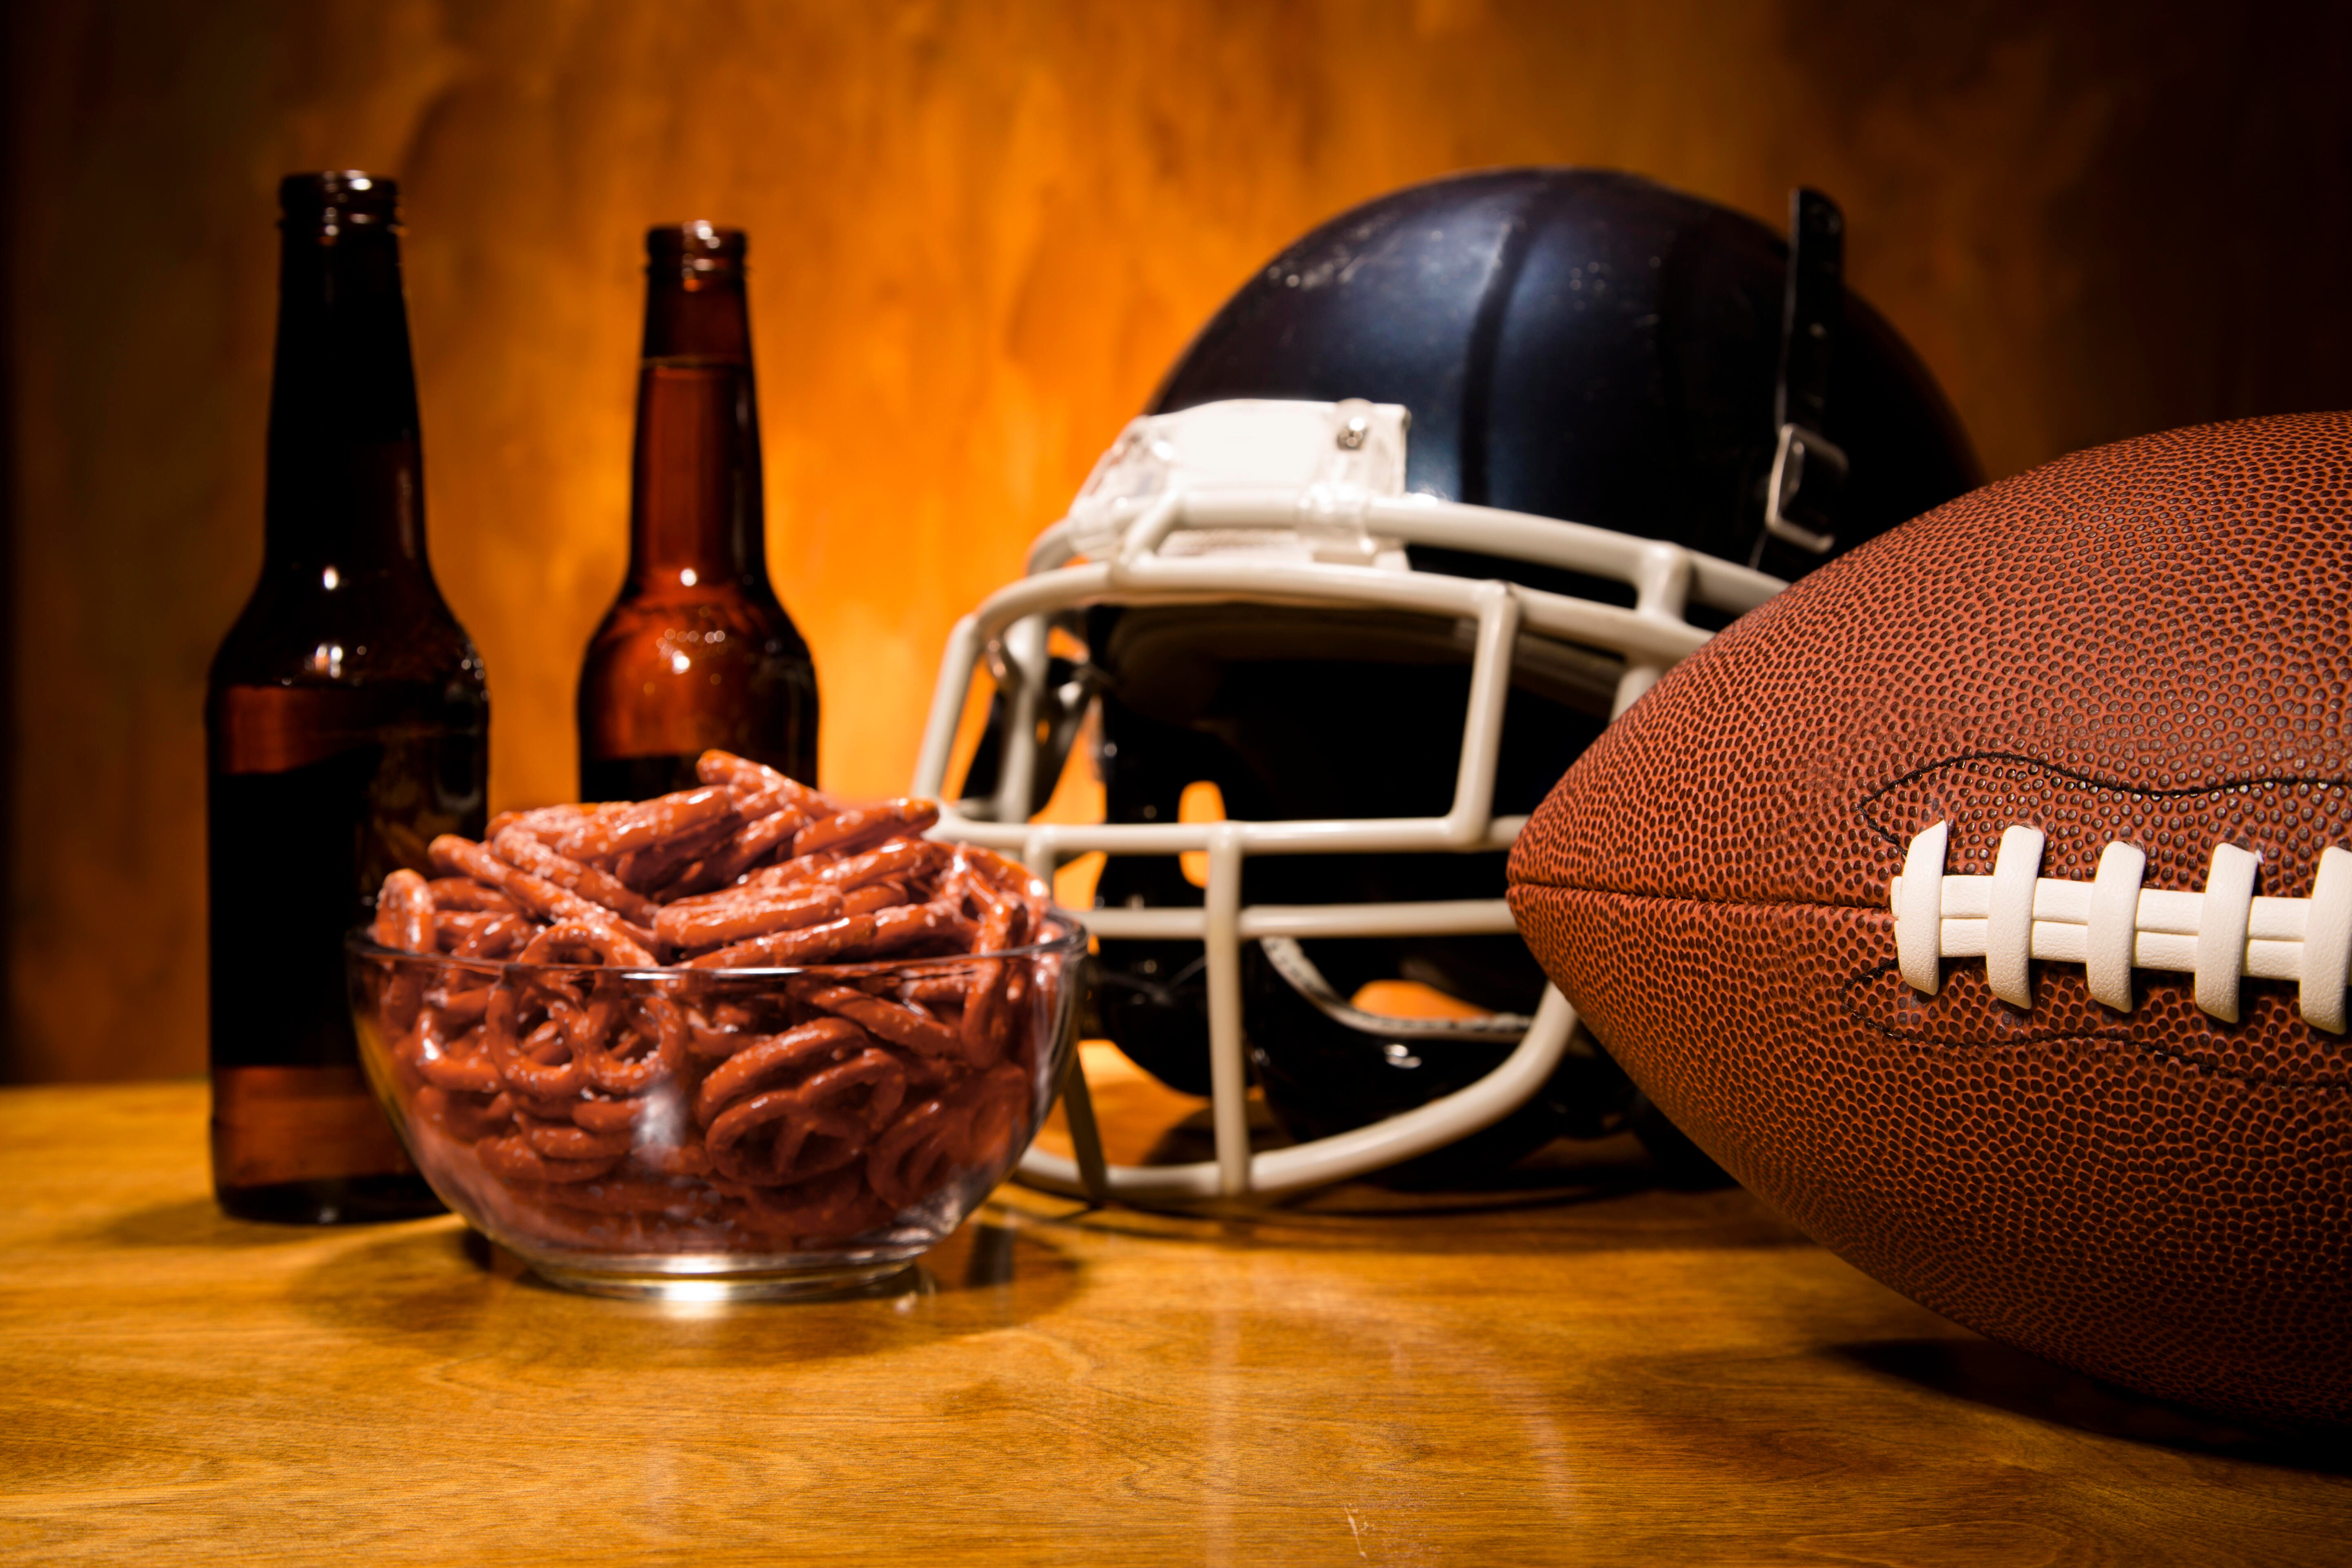 You can still host a big game watch party safely this Sunday. Here's how
                        Super Bowl Sunday can still be fun, even if you're hanging out with your friends on Zoom or in a socially distanced fashion.